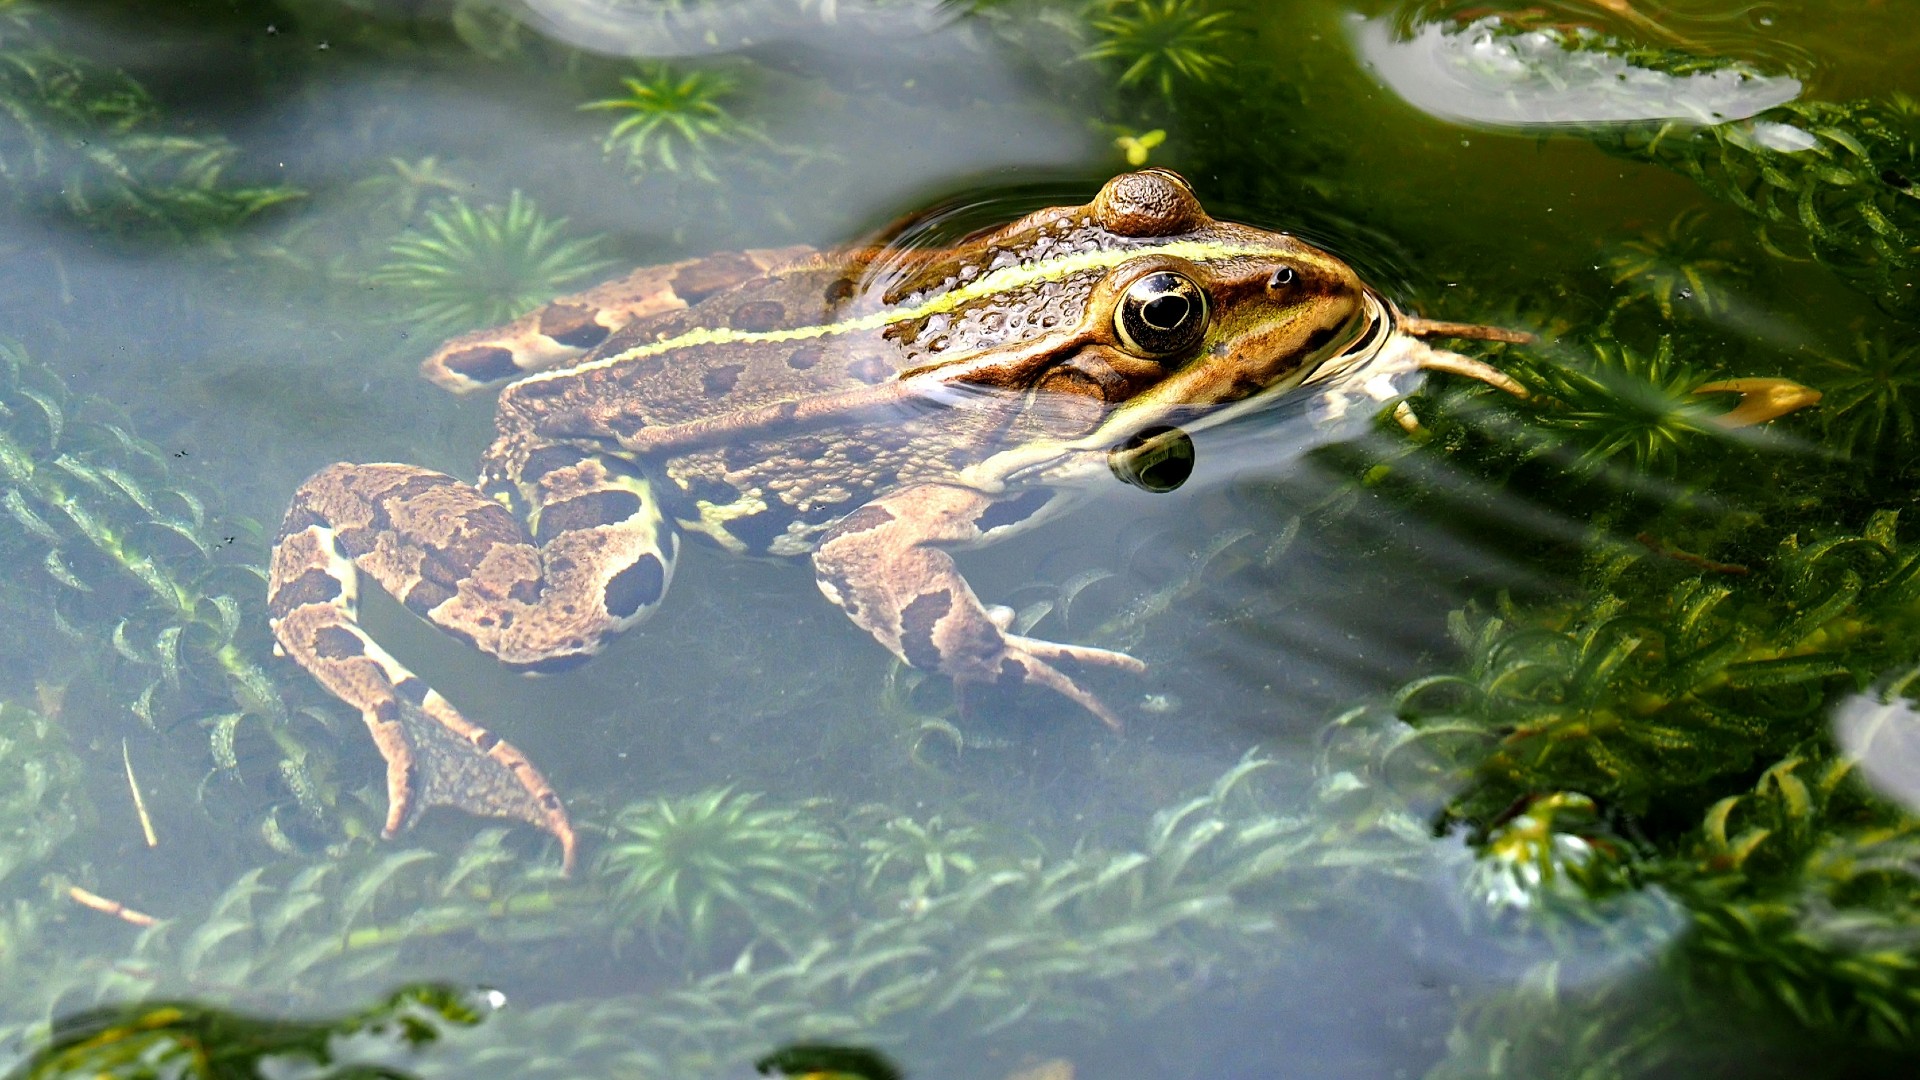 A frog swimming in a pond